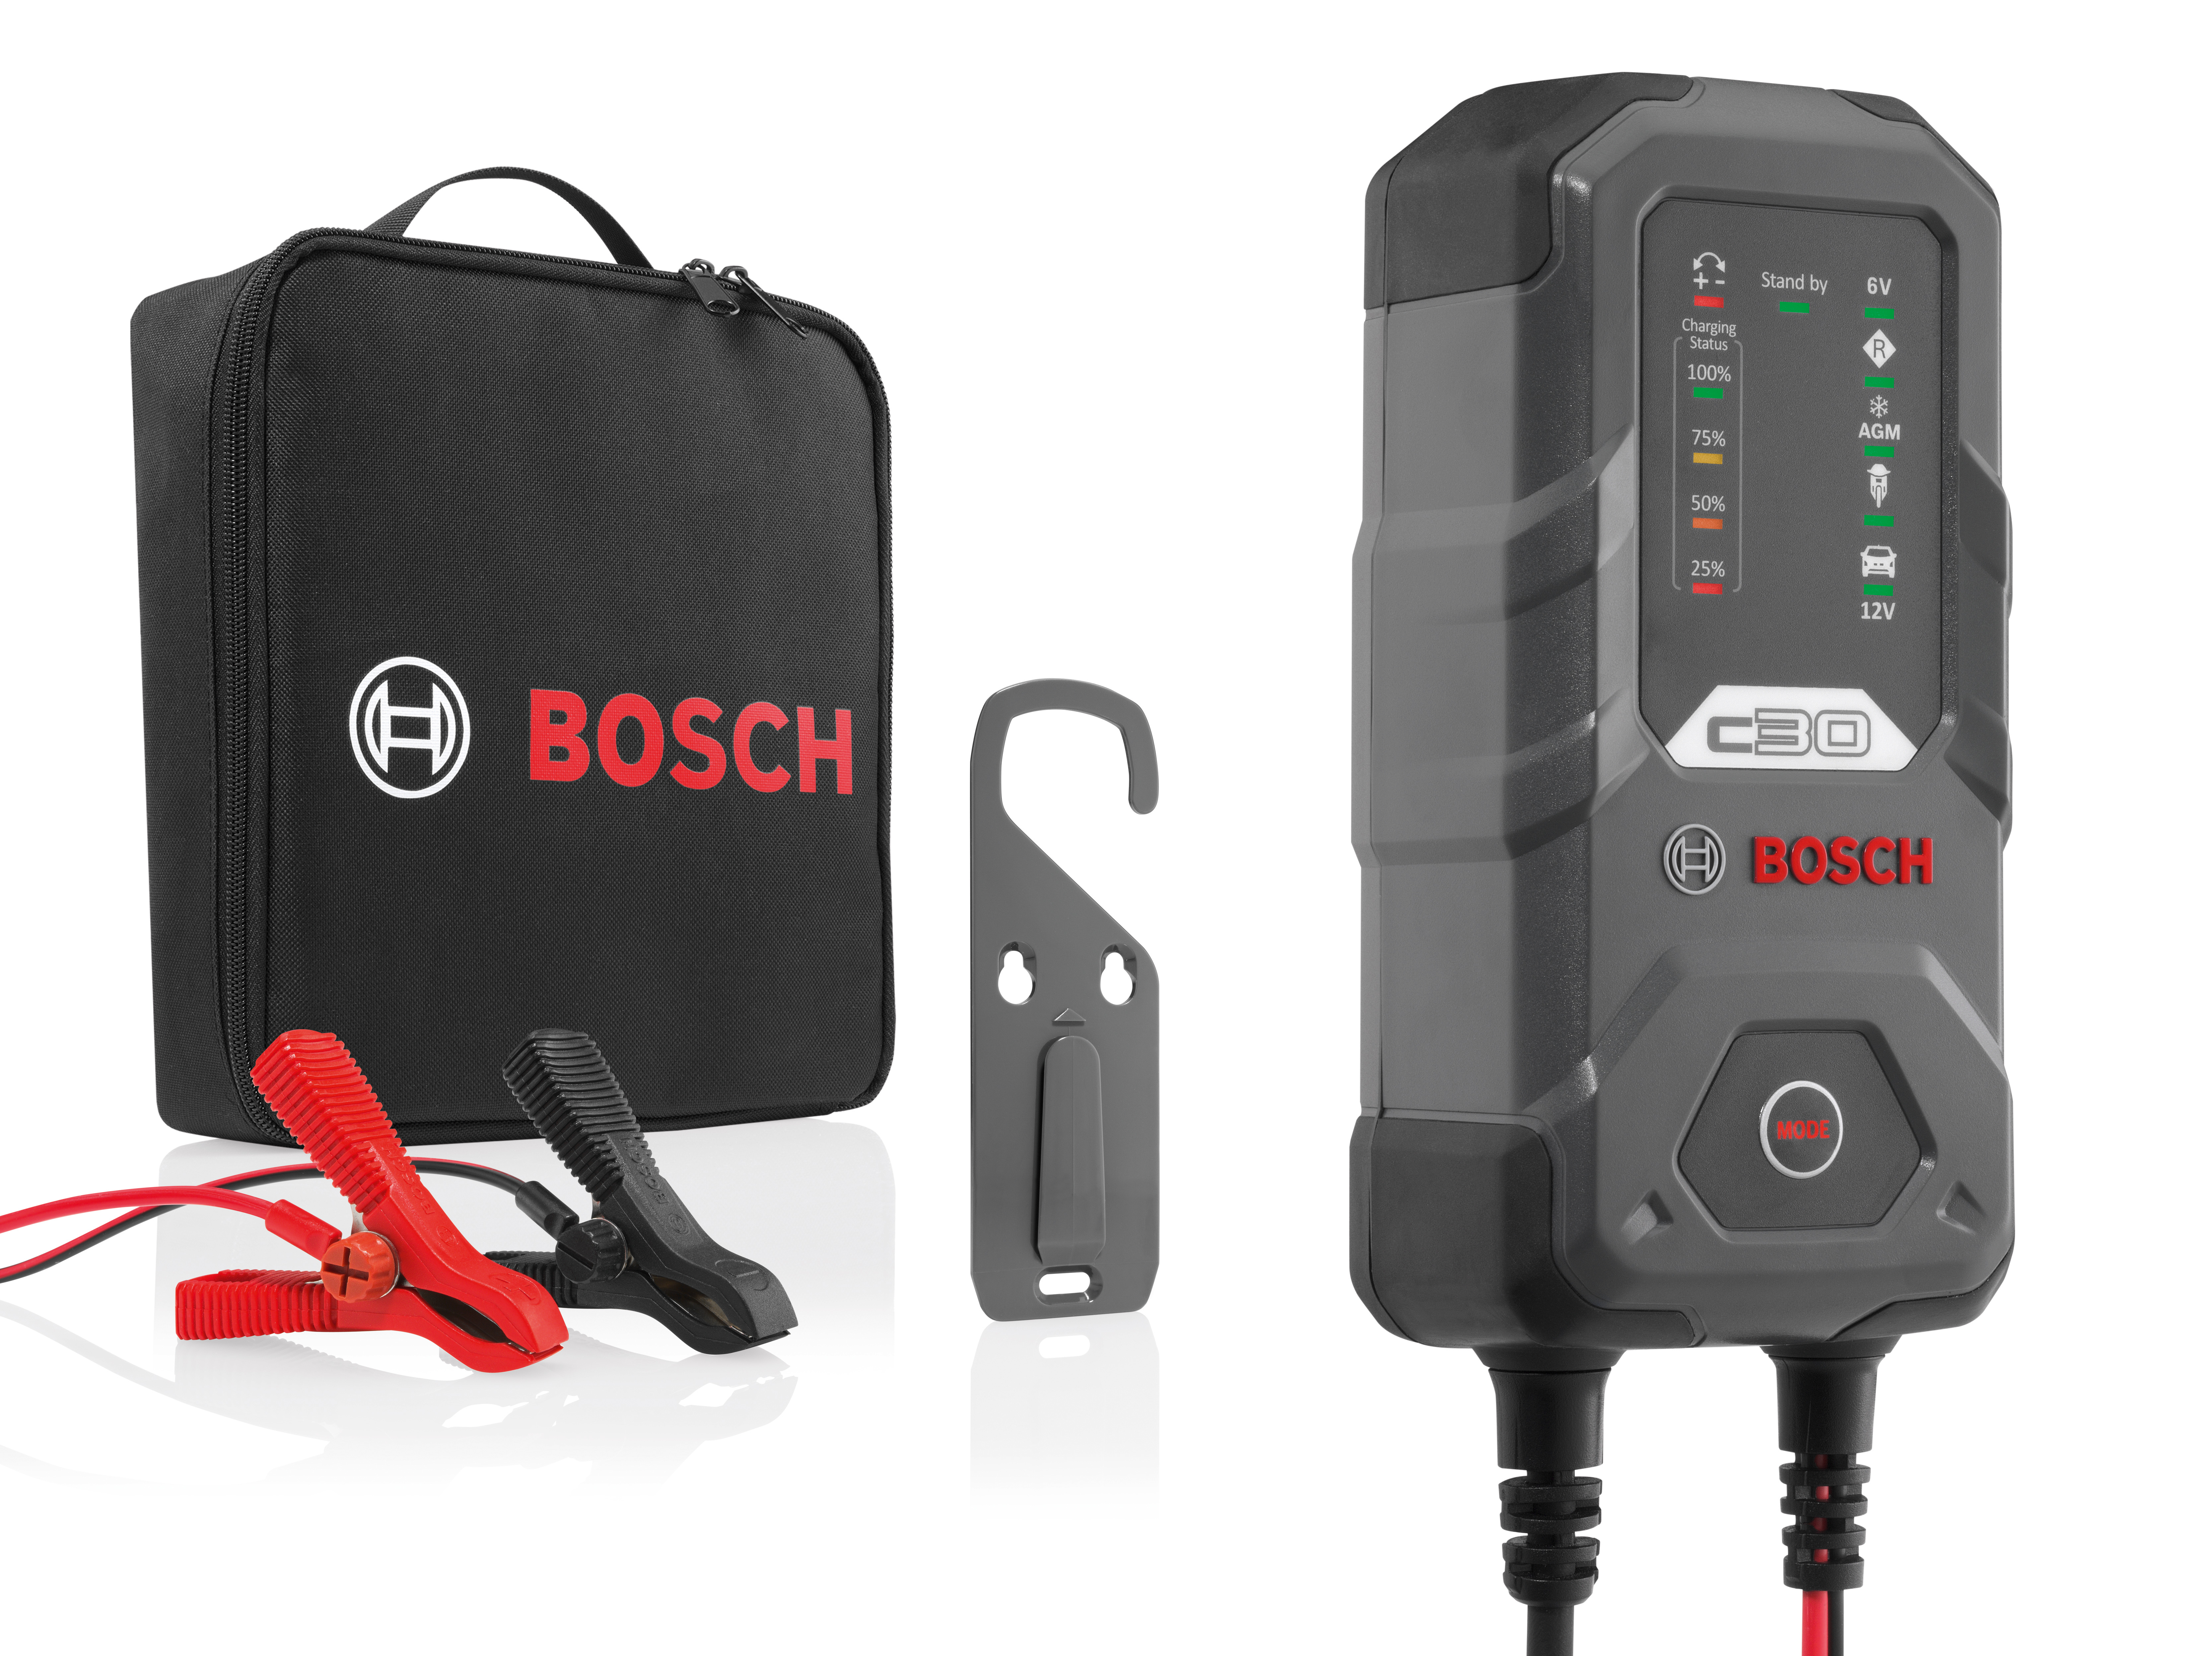 New generation of Bosch battery chargers offers more power and